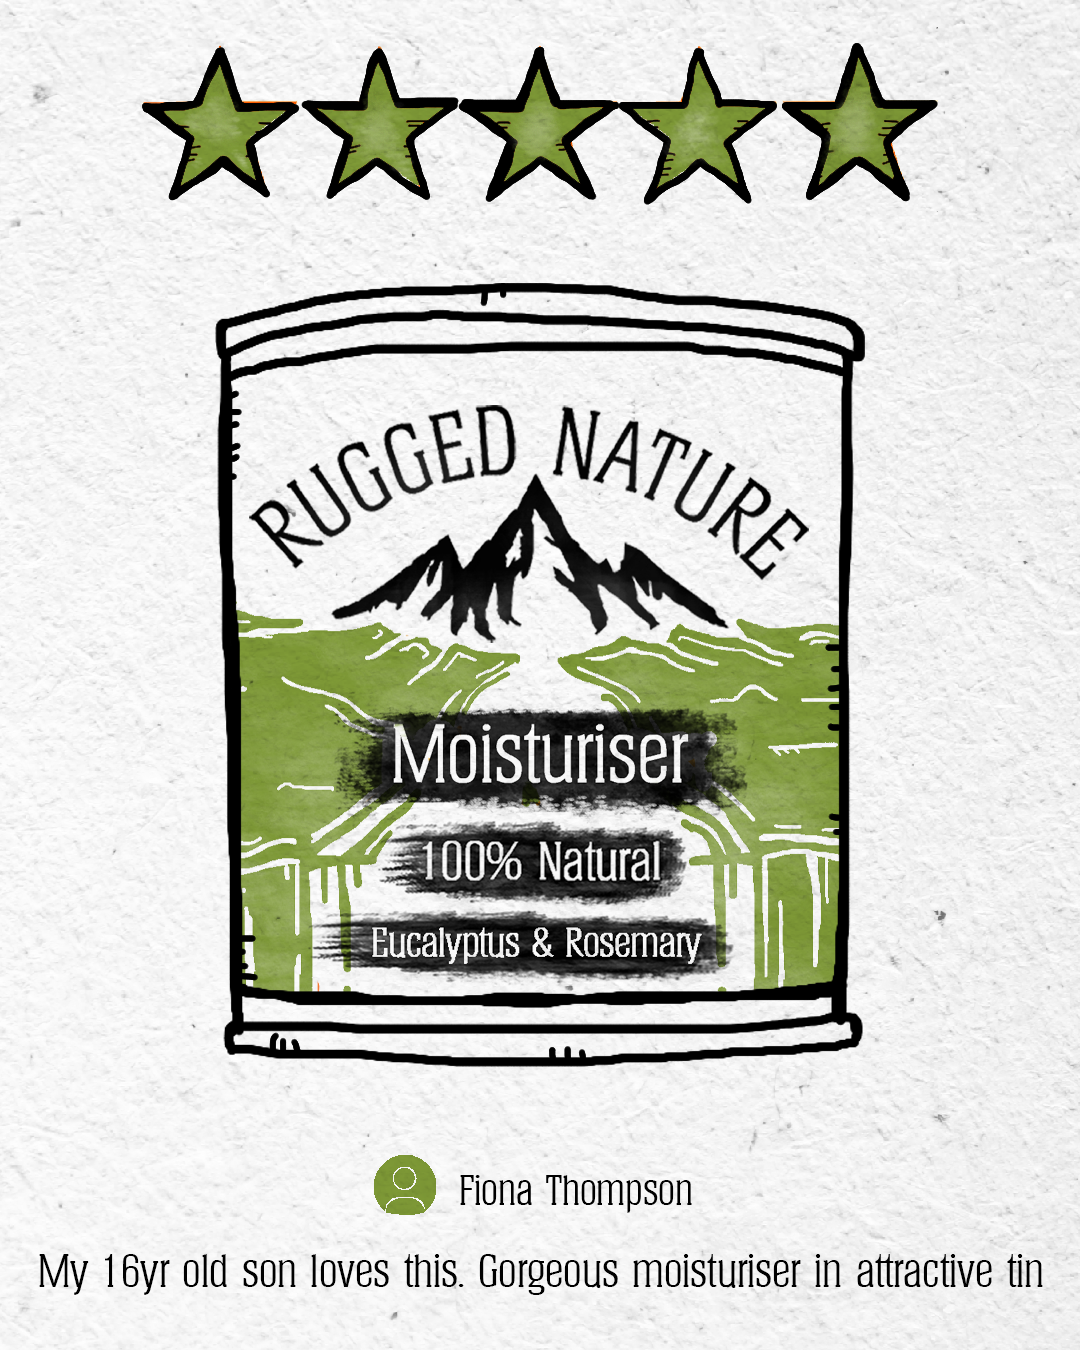 Copy of rugged nature review3.png